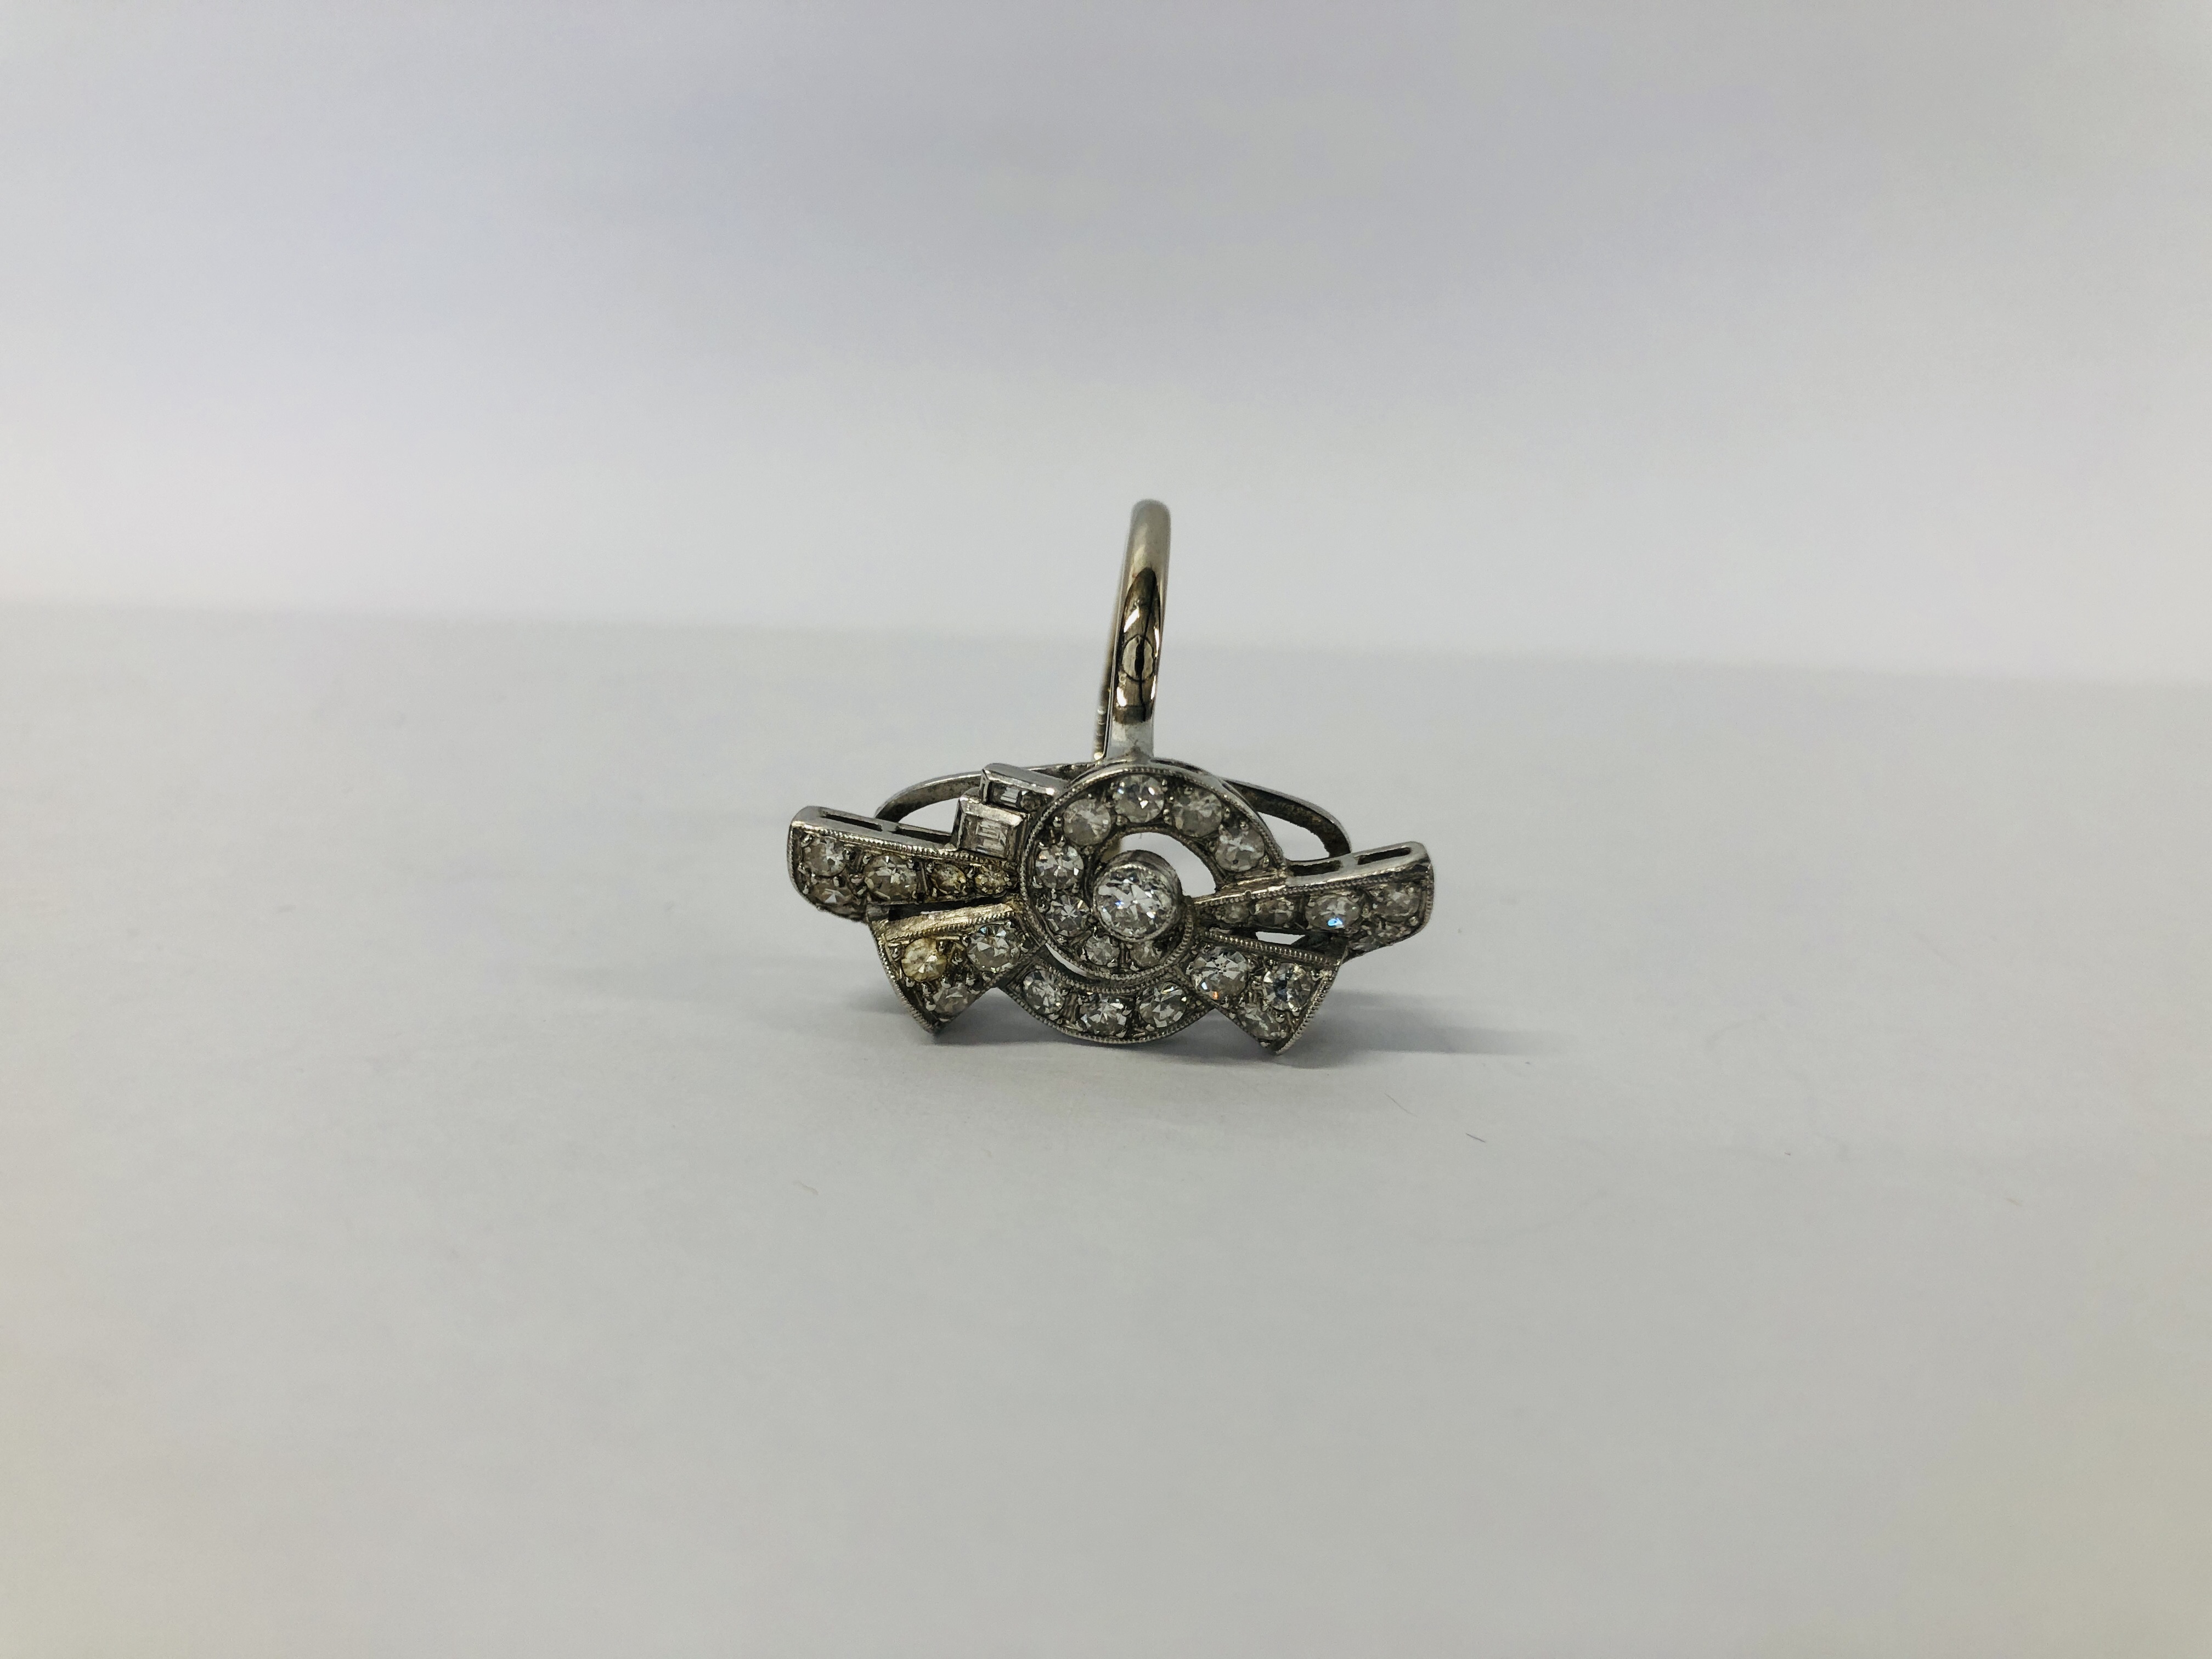 AN 18CT. PLATINUM ART DECO BOW STYLE RING SET WITH MULTIPLE DIAMONDS.